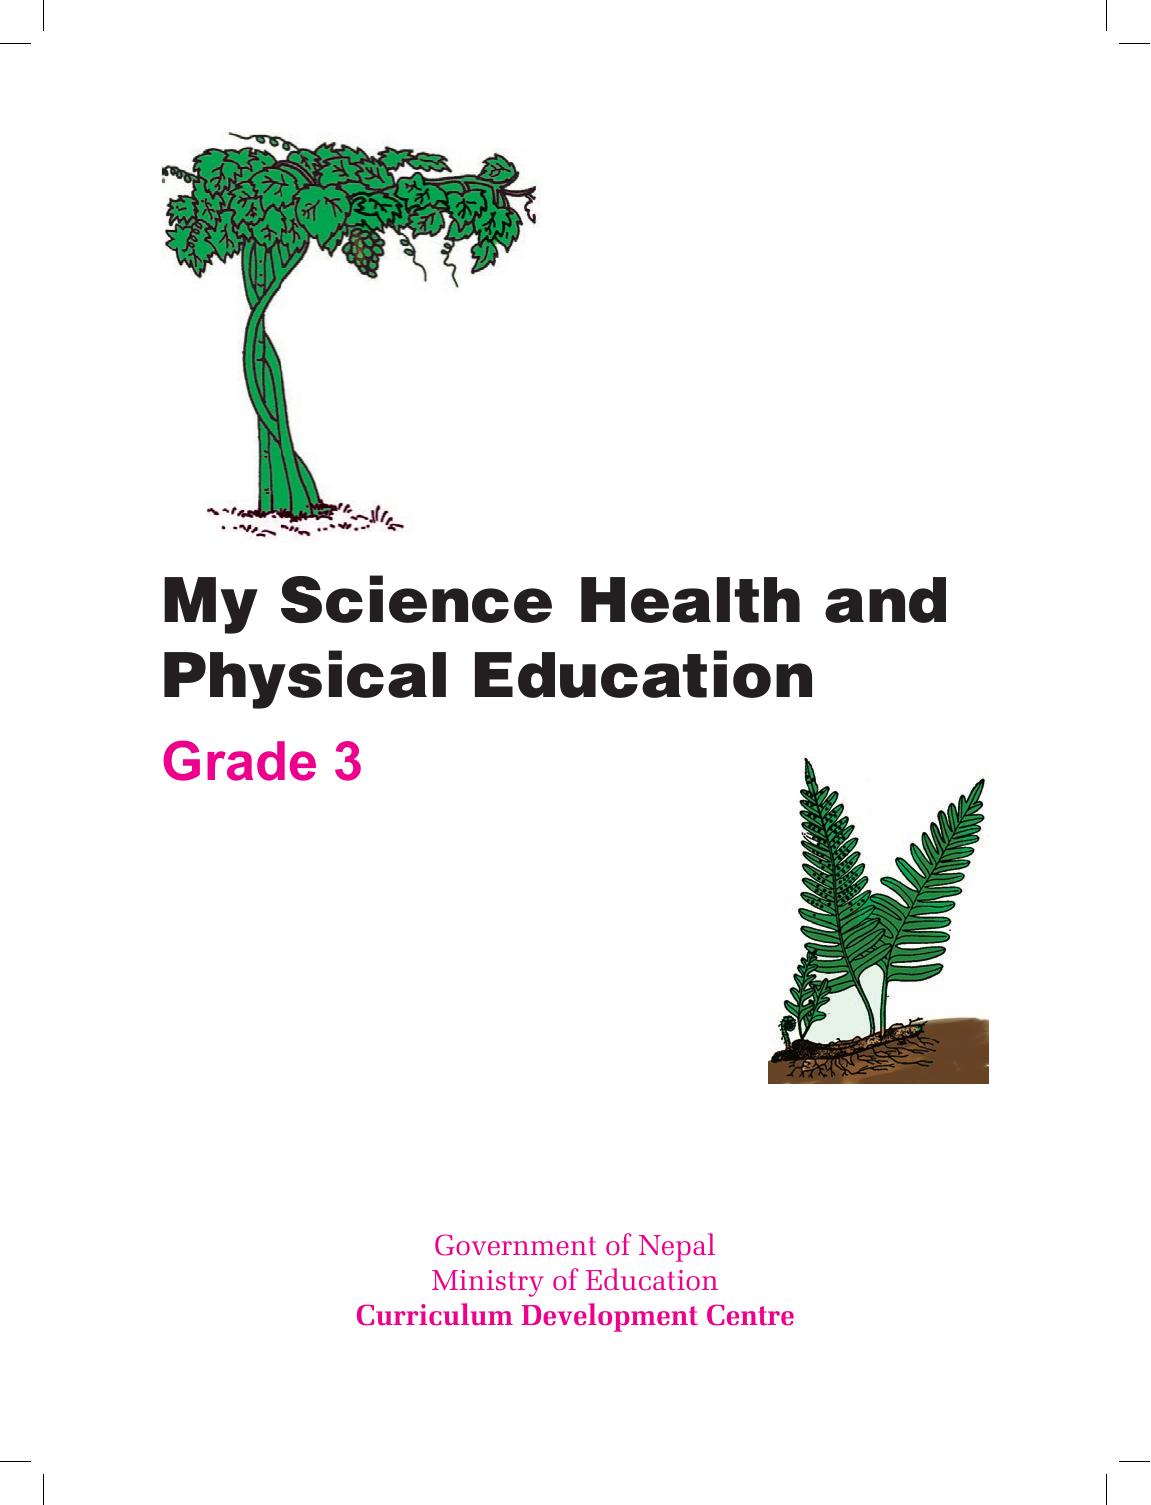 CDC 2018 - My Science Health and Physical Eduation Grade 3